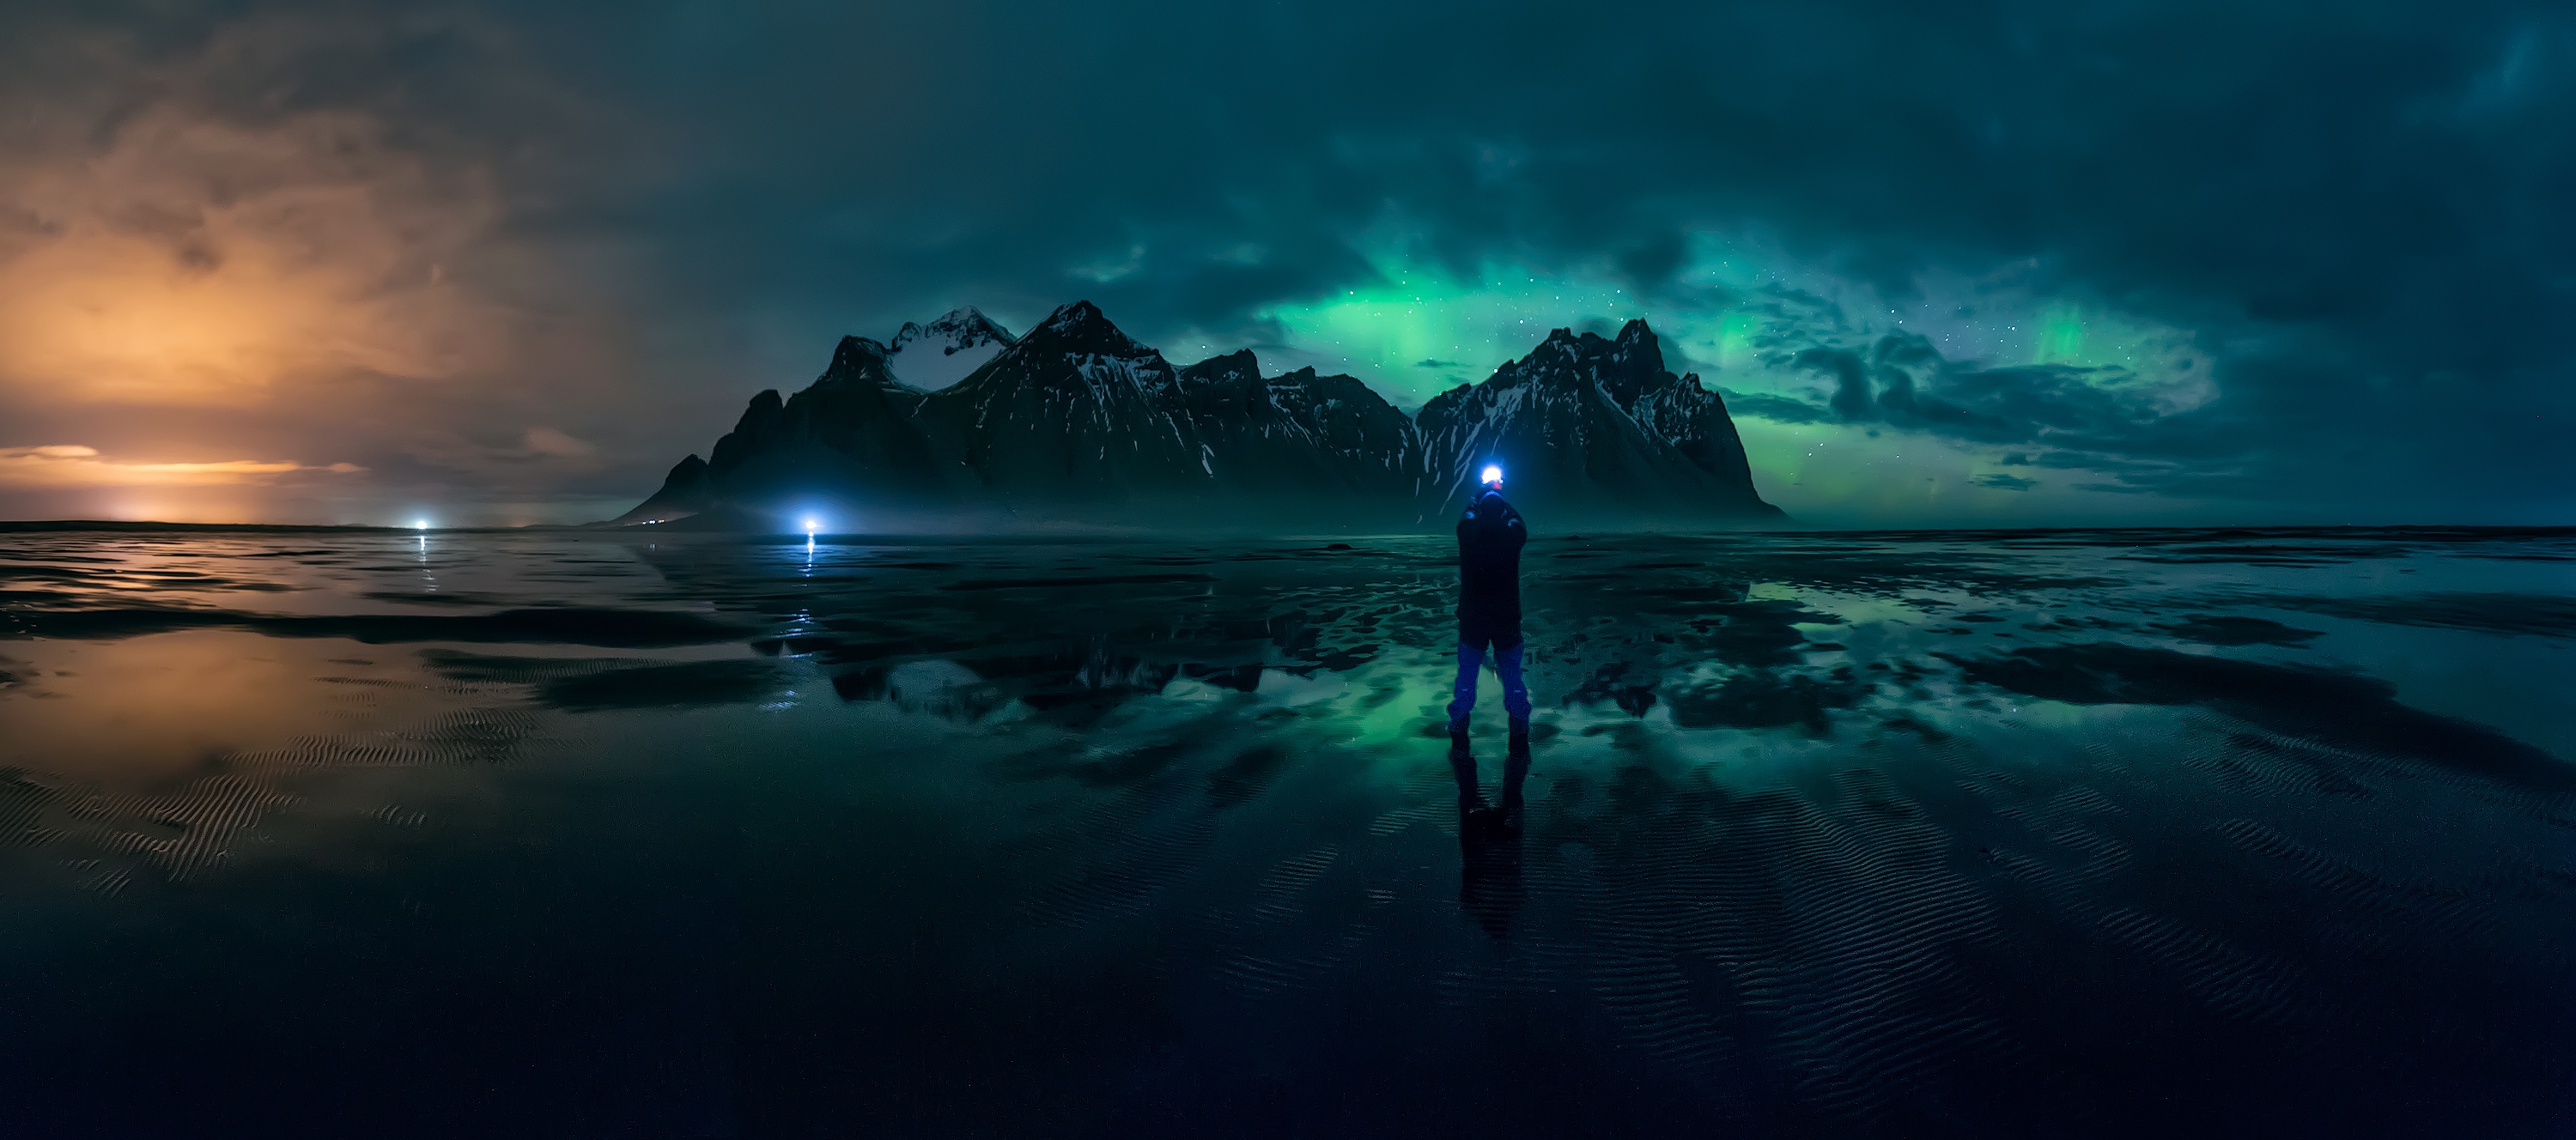 Wallpapers Iceland Northern lights sea on the desktop